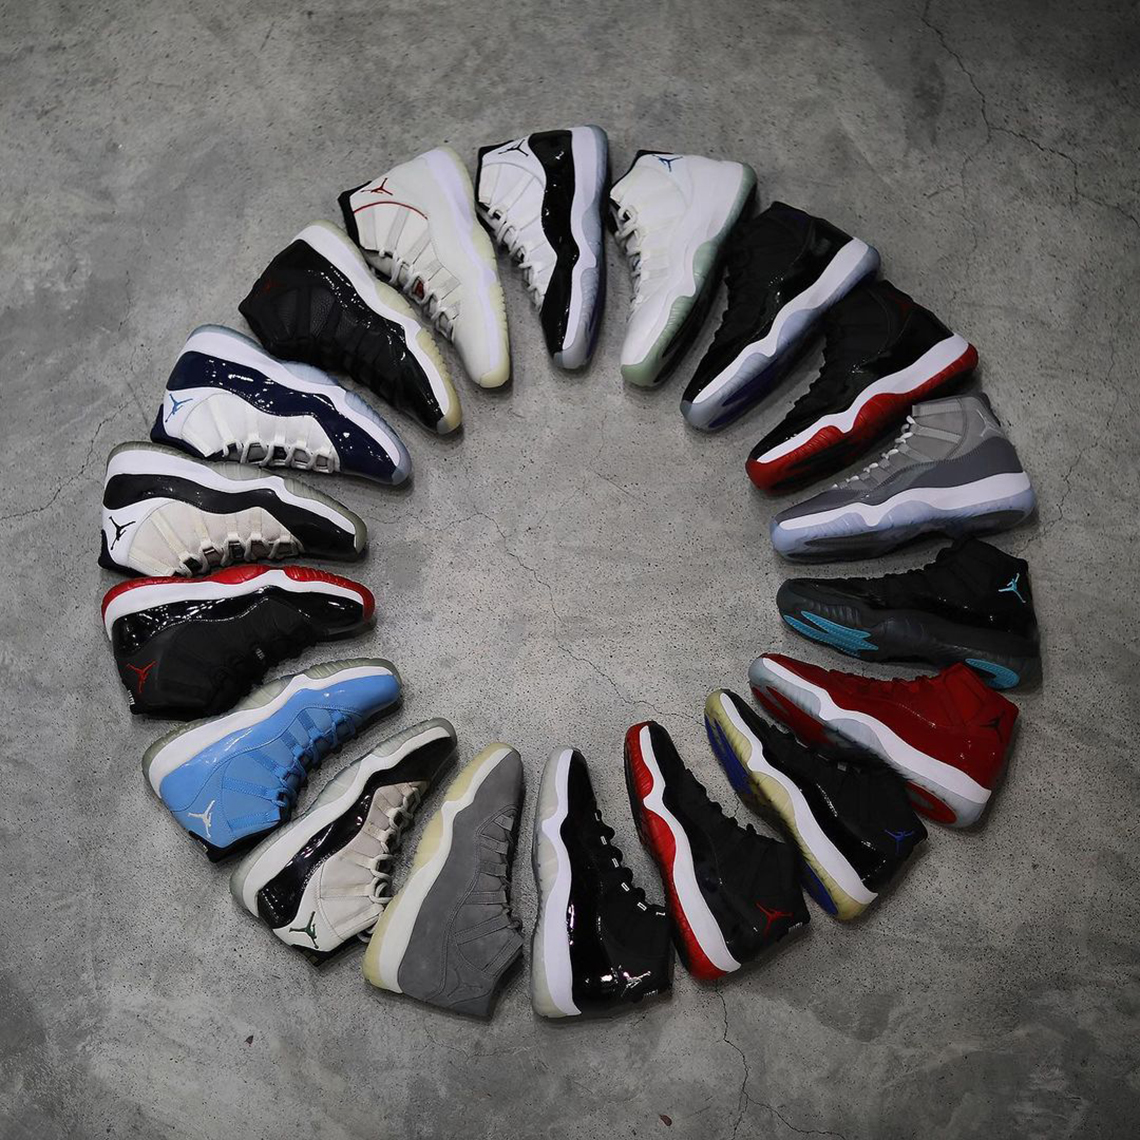 how often do the jordan 11 come out